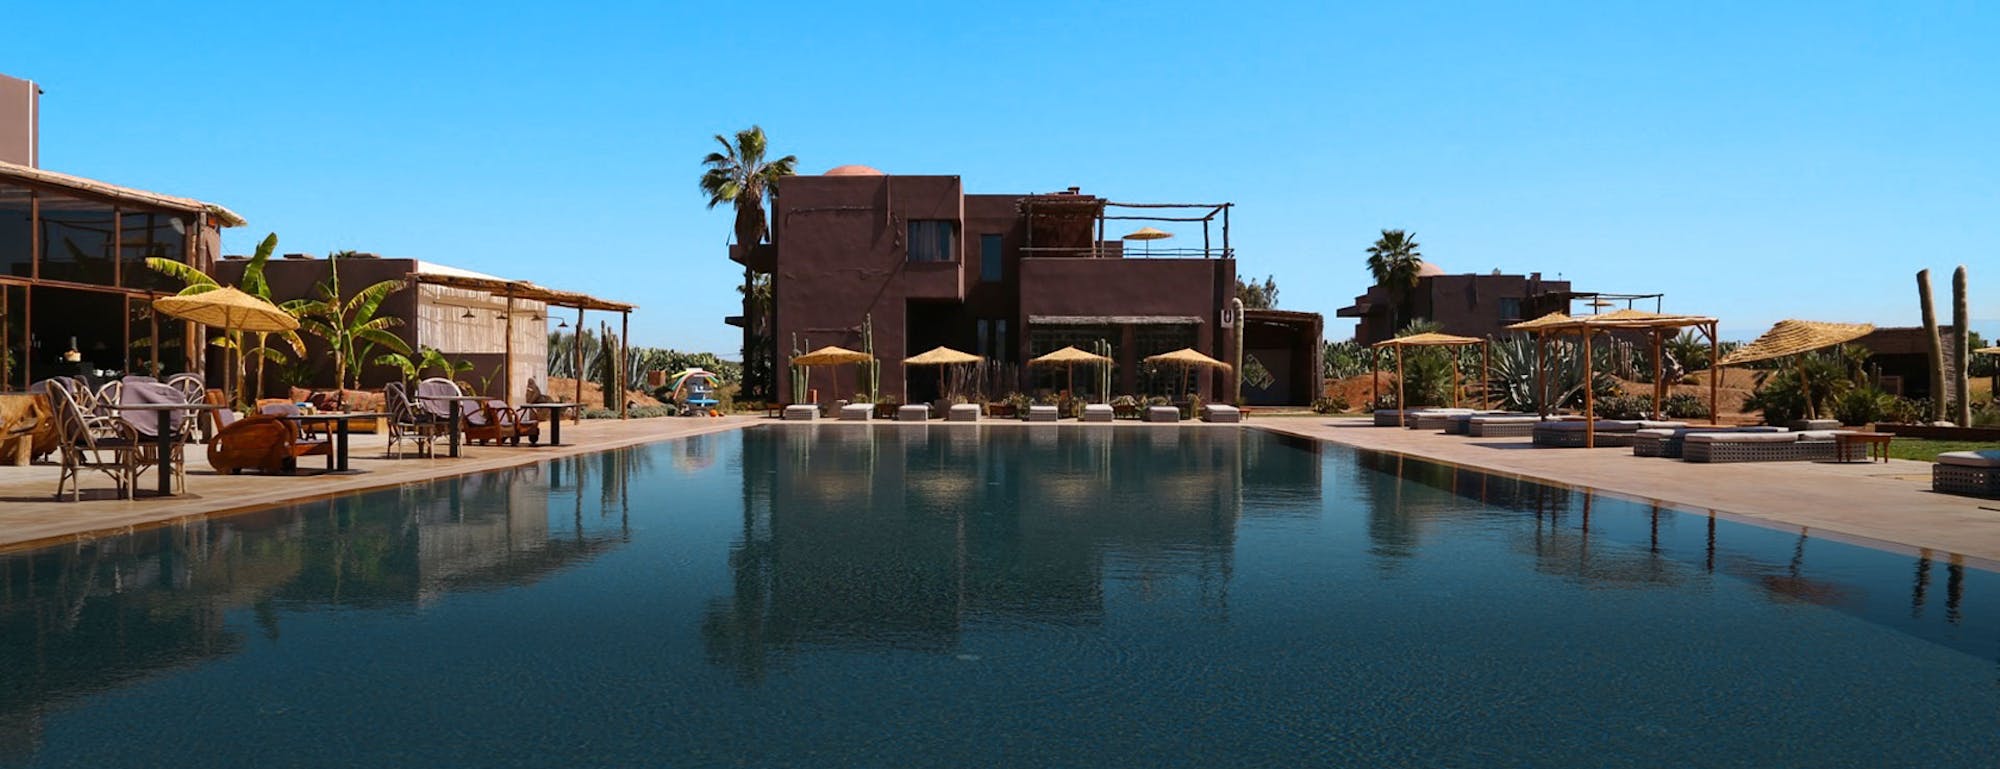 Hotel with pool in foreground, palms behind